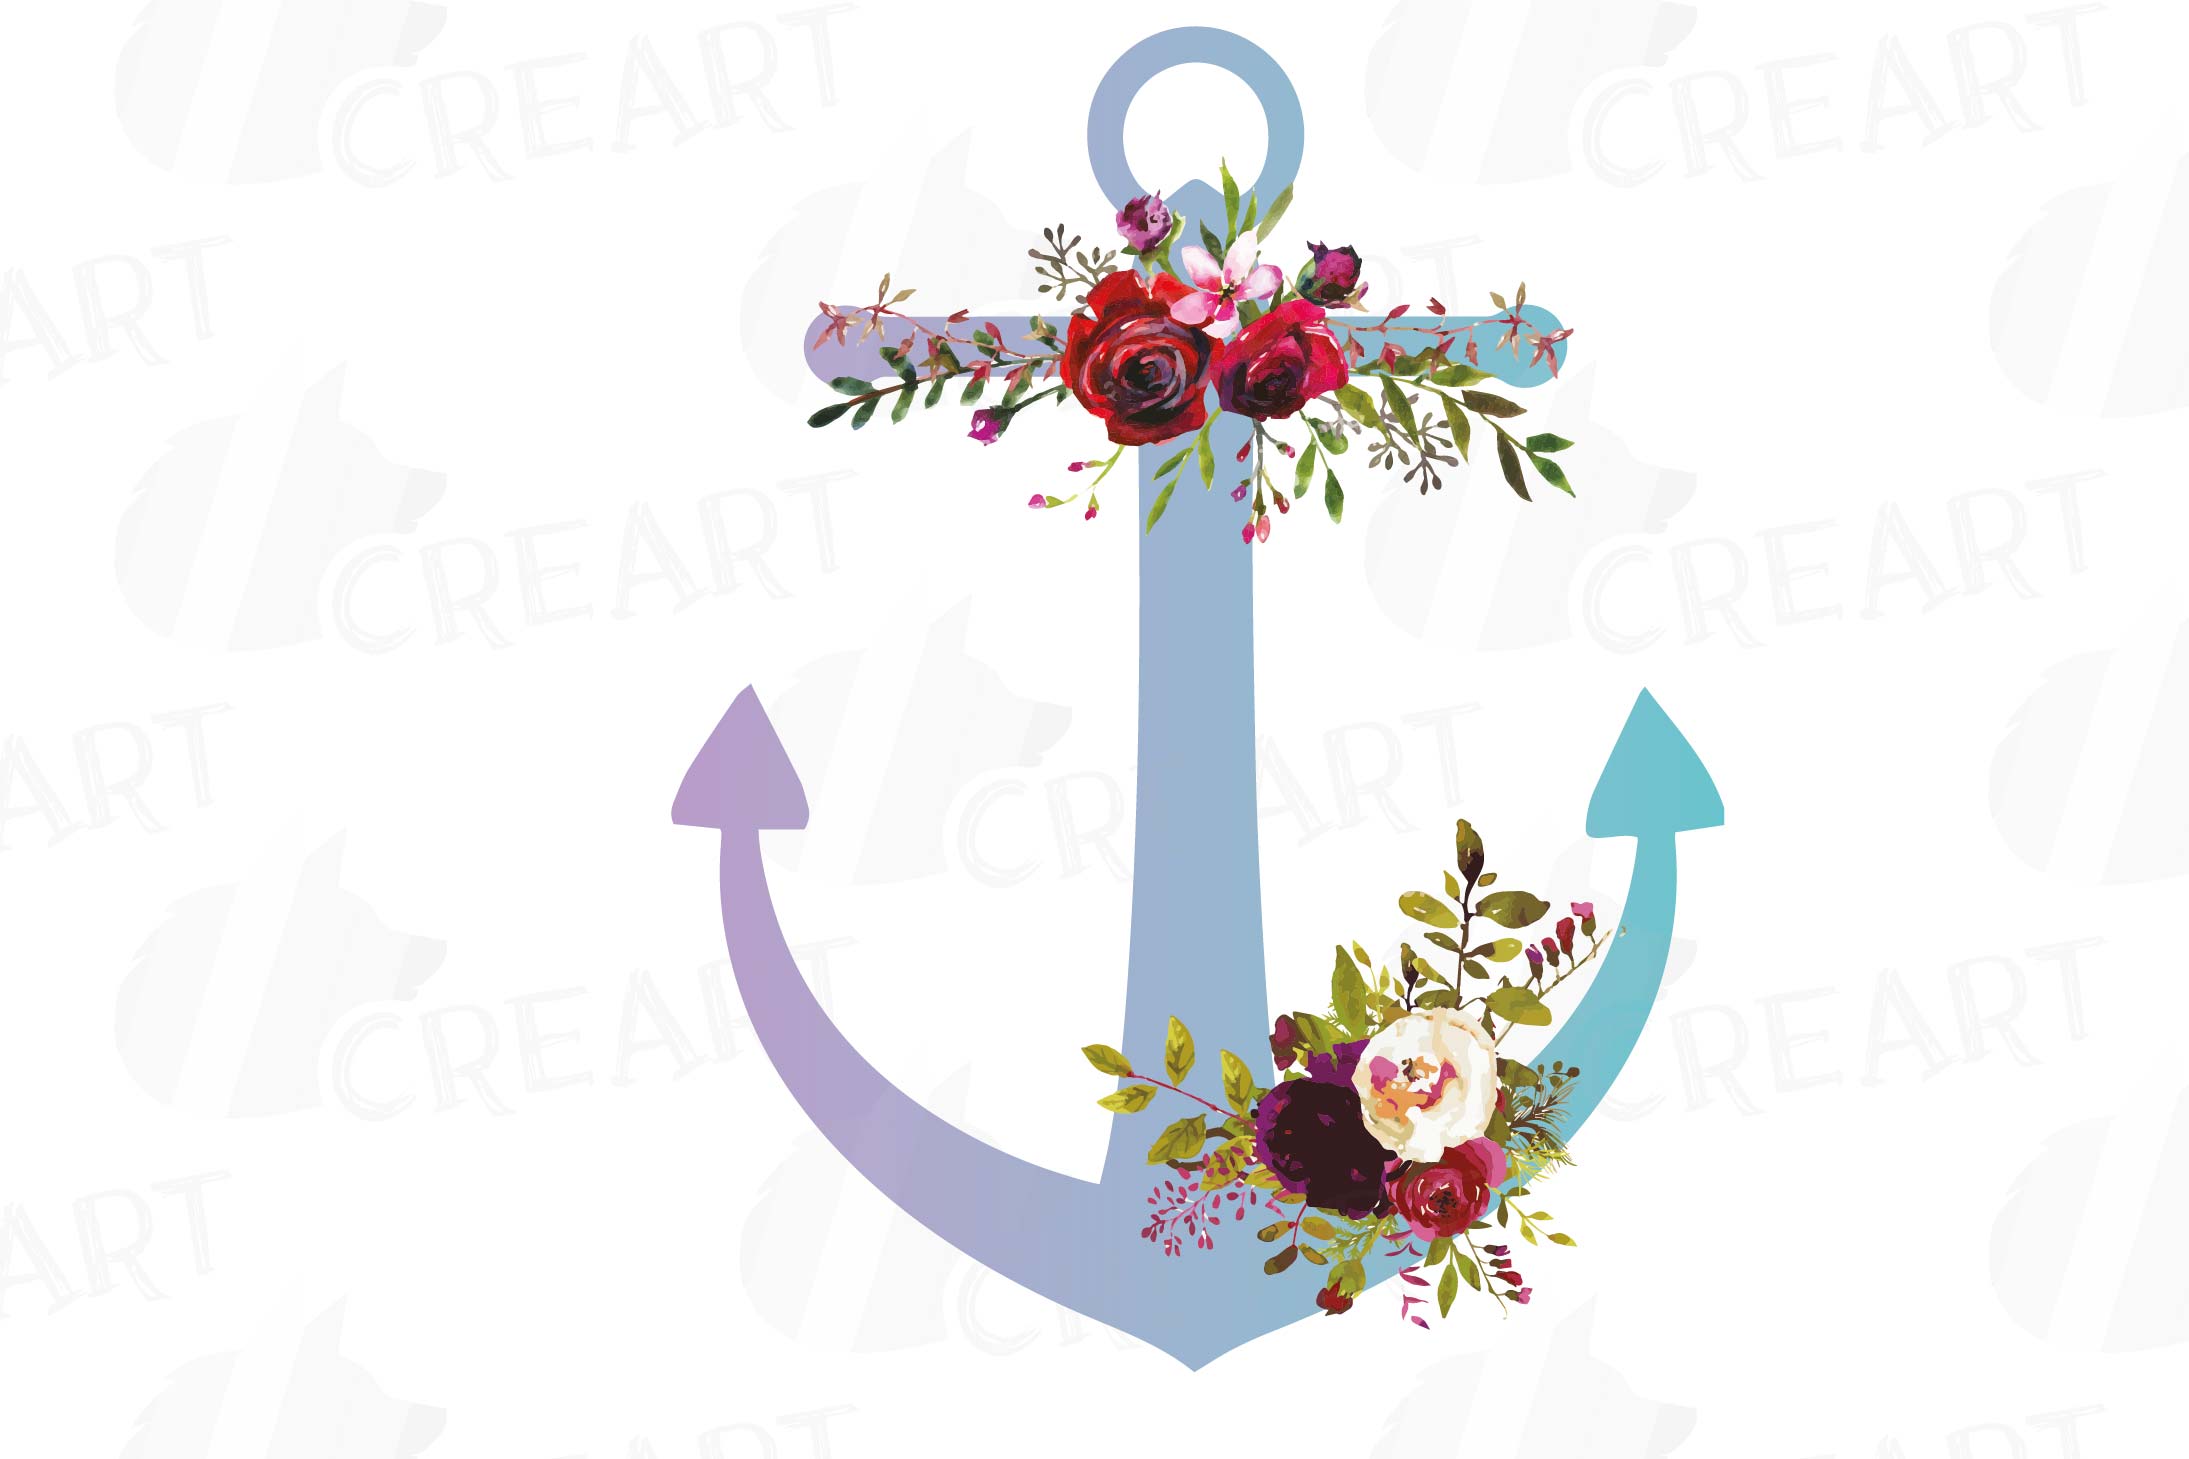 Download Colorful Floral Anchor clip art collection, watercolor ...